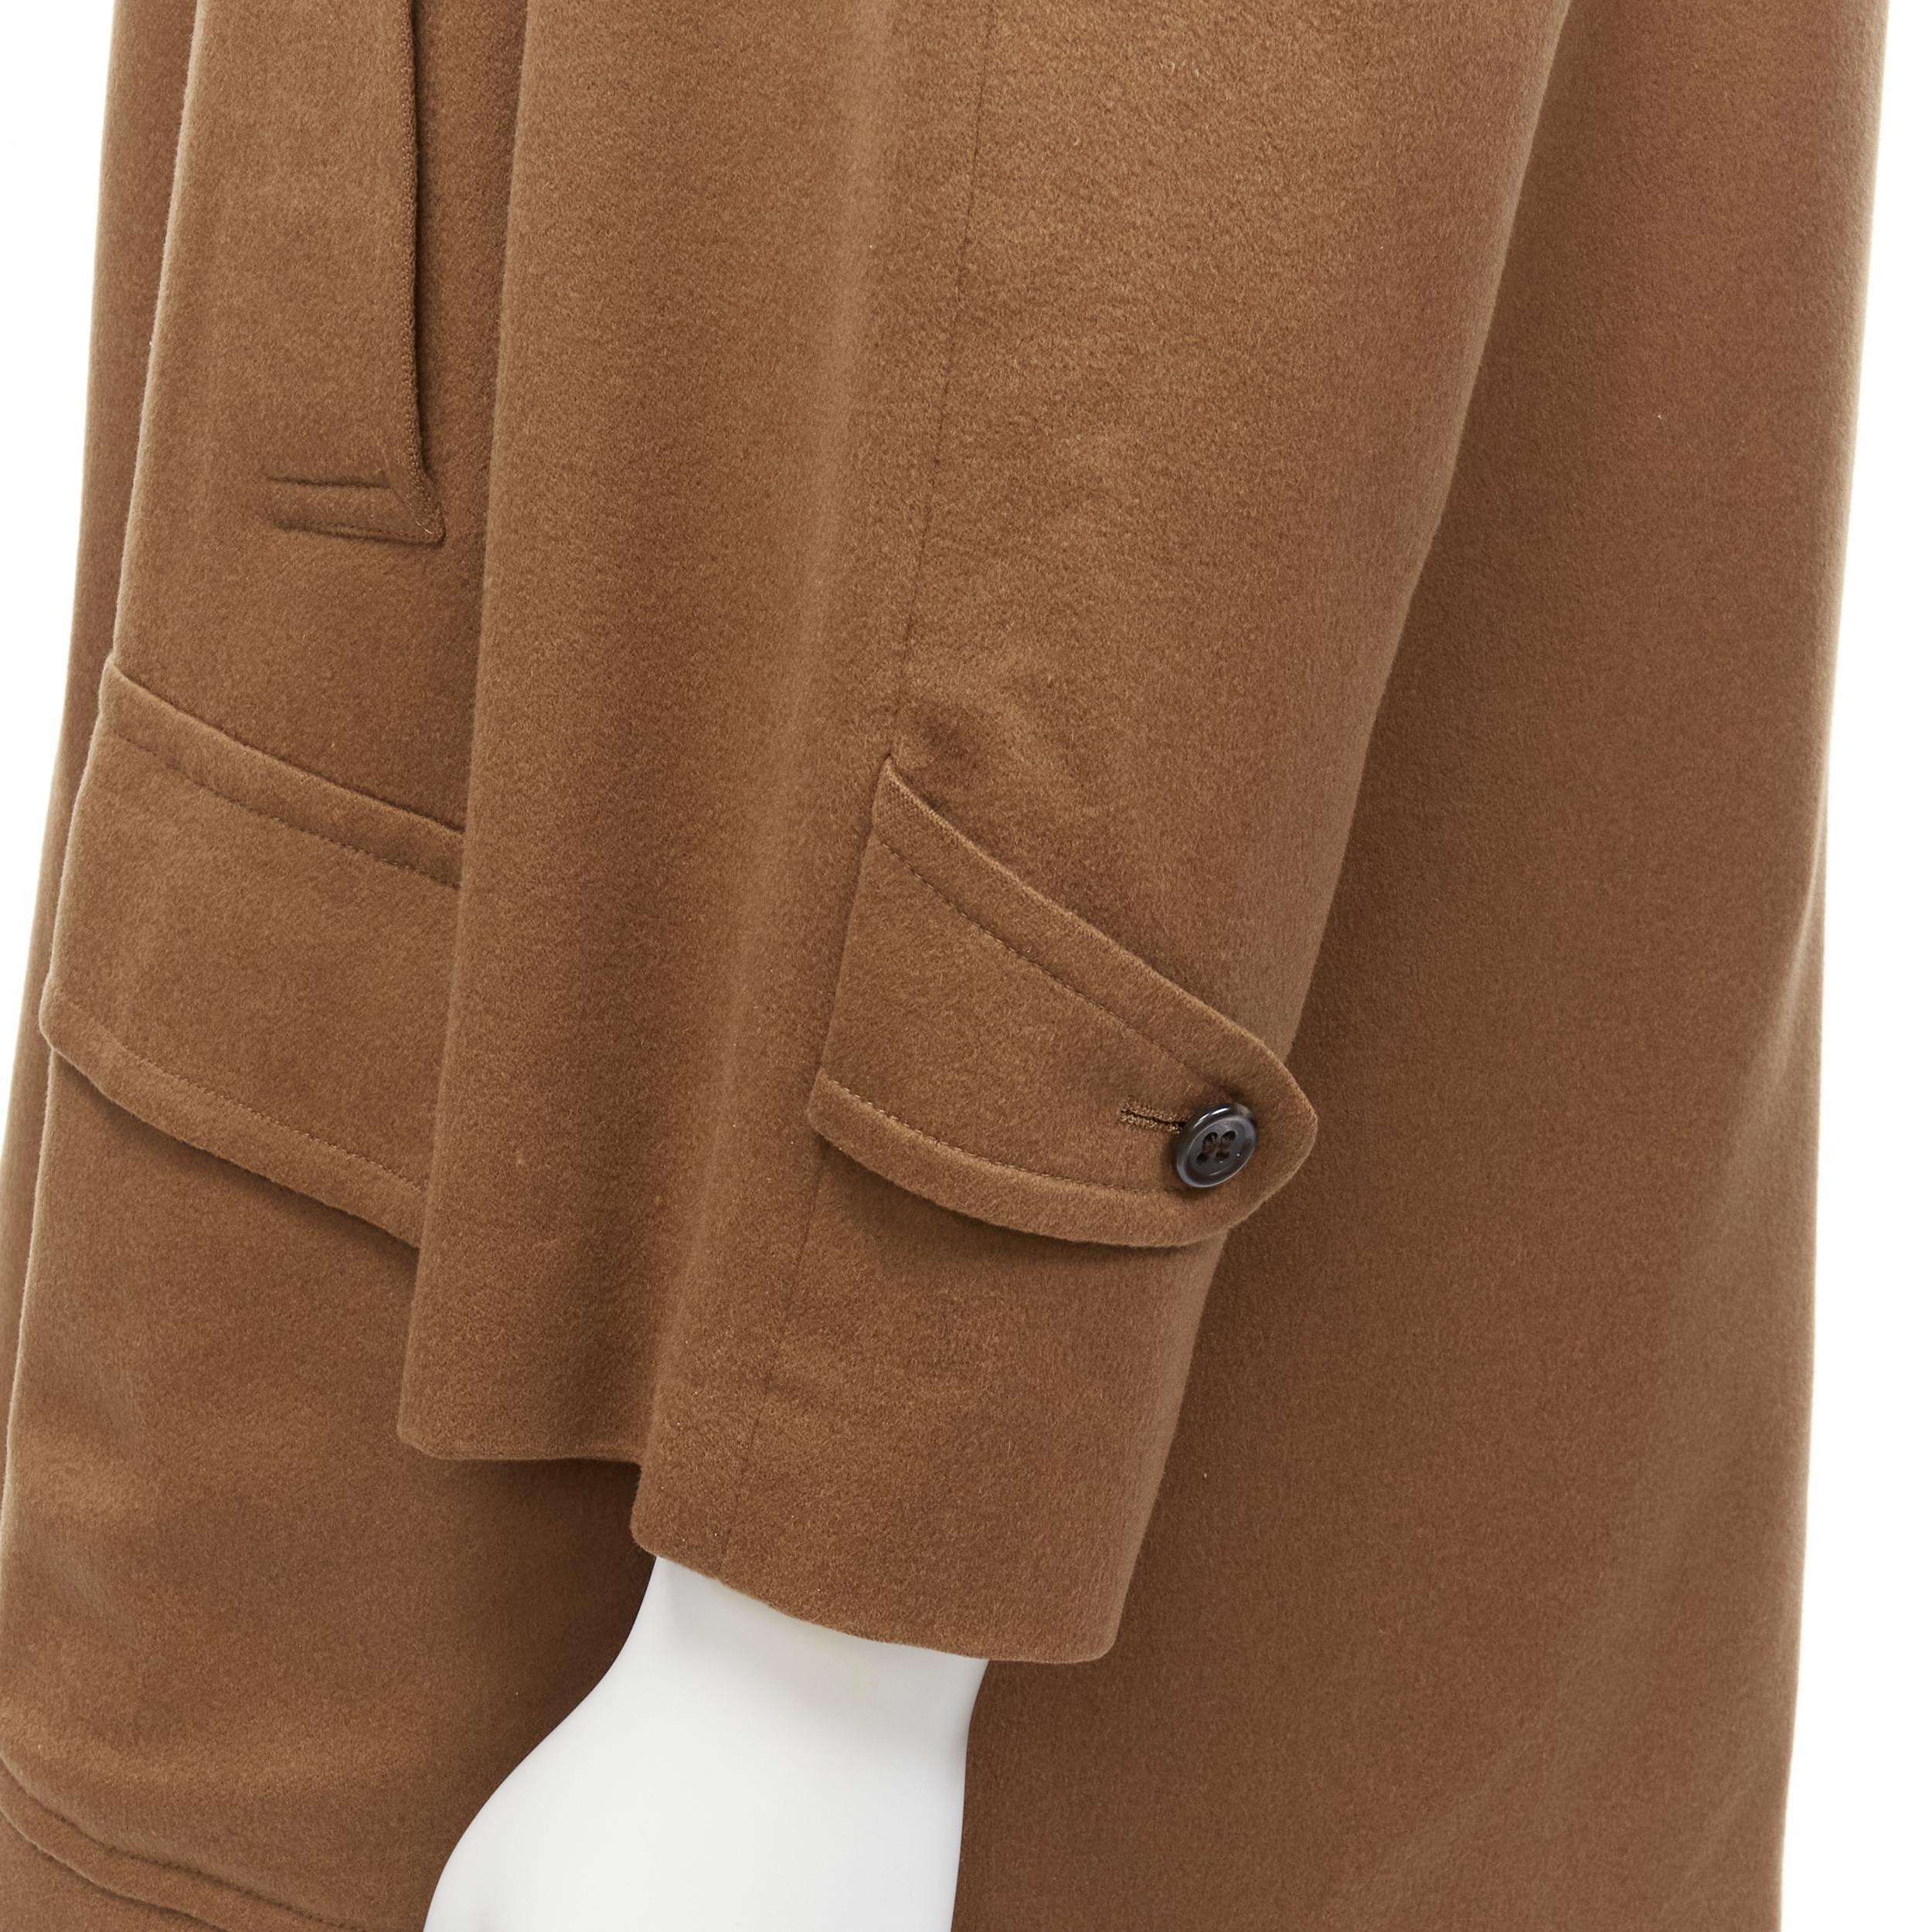 LORO PIANA 100% cashmere brown invisible buttons minimal coat XS
Reference: TGAS/D00141
Brand: Loro Piana
Material: Cashmere
Color: Tan Brown
Pattern: Solid
Closure: Button
Lining: Multicolour Fabric
Made in: Italy

CONDITION:
Condition: Very good,